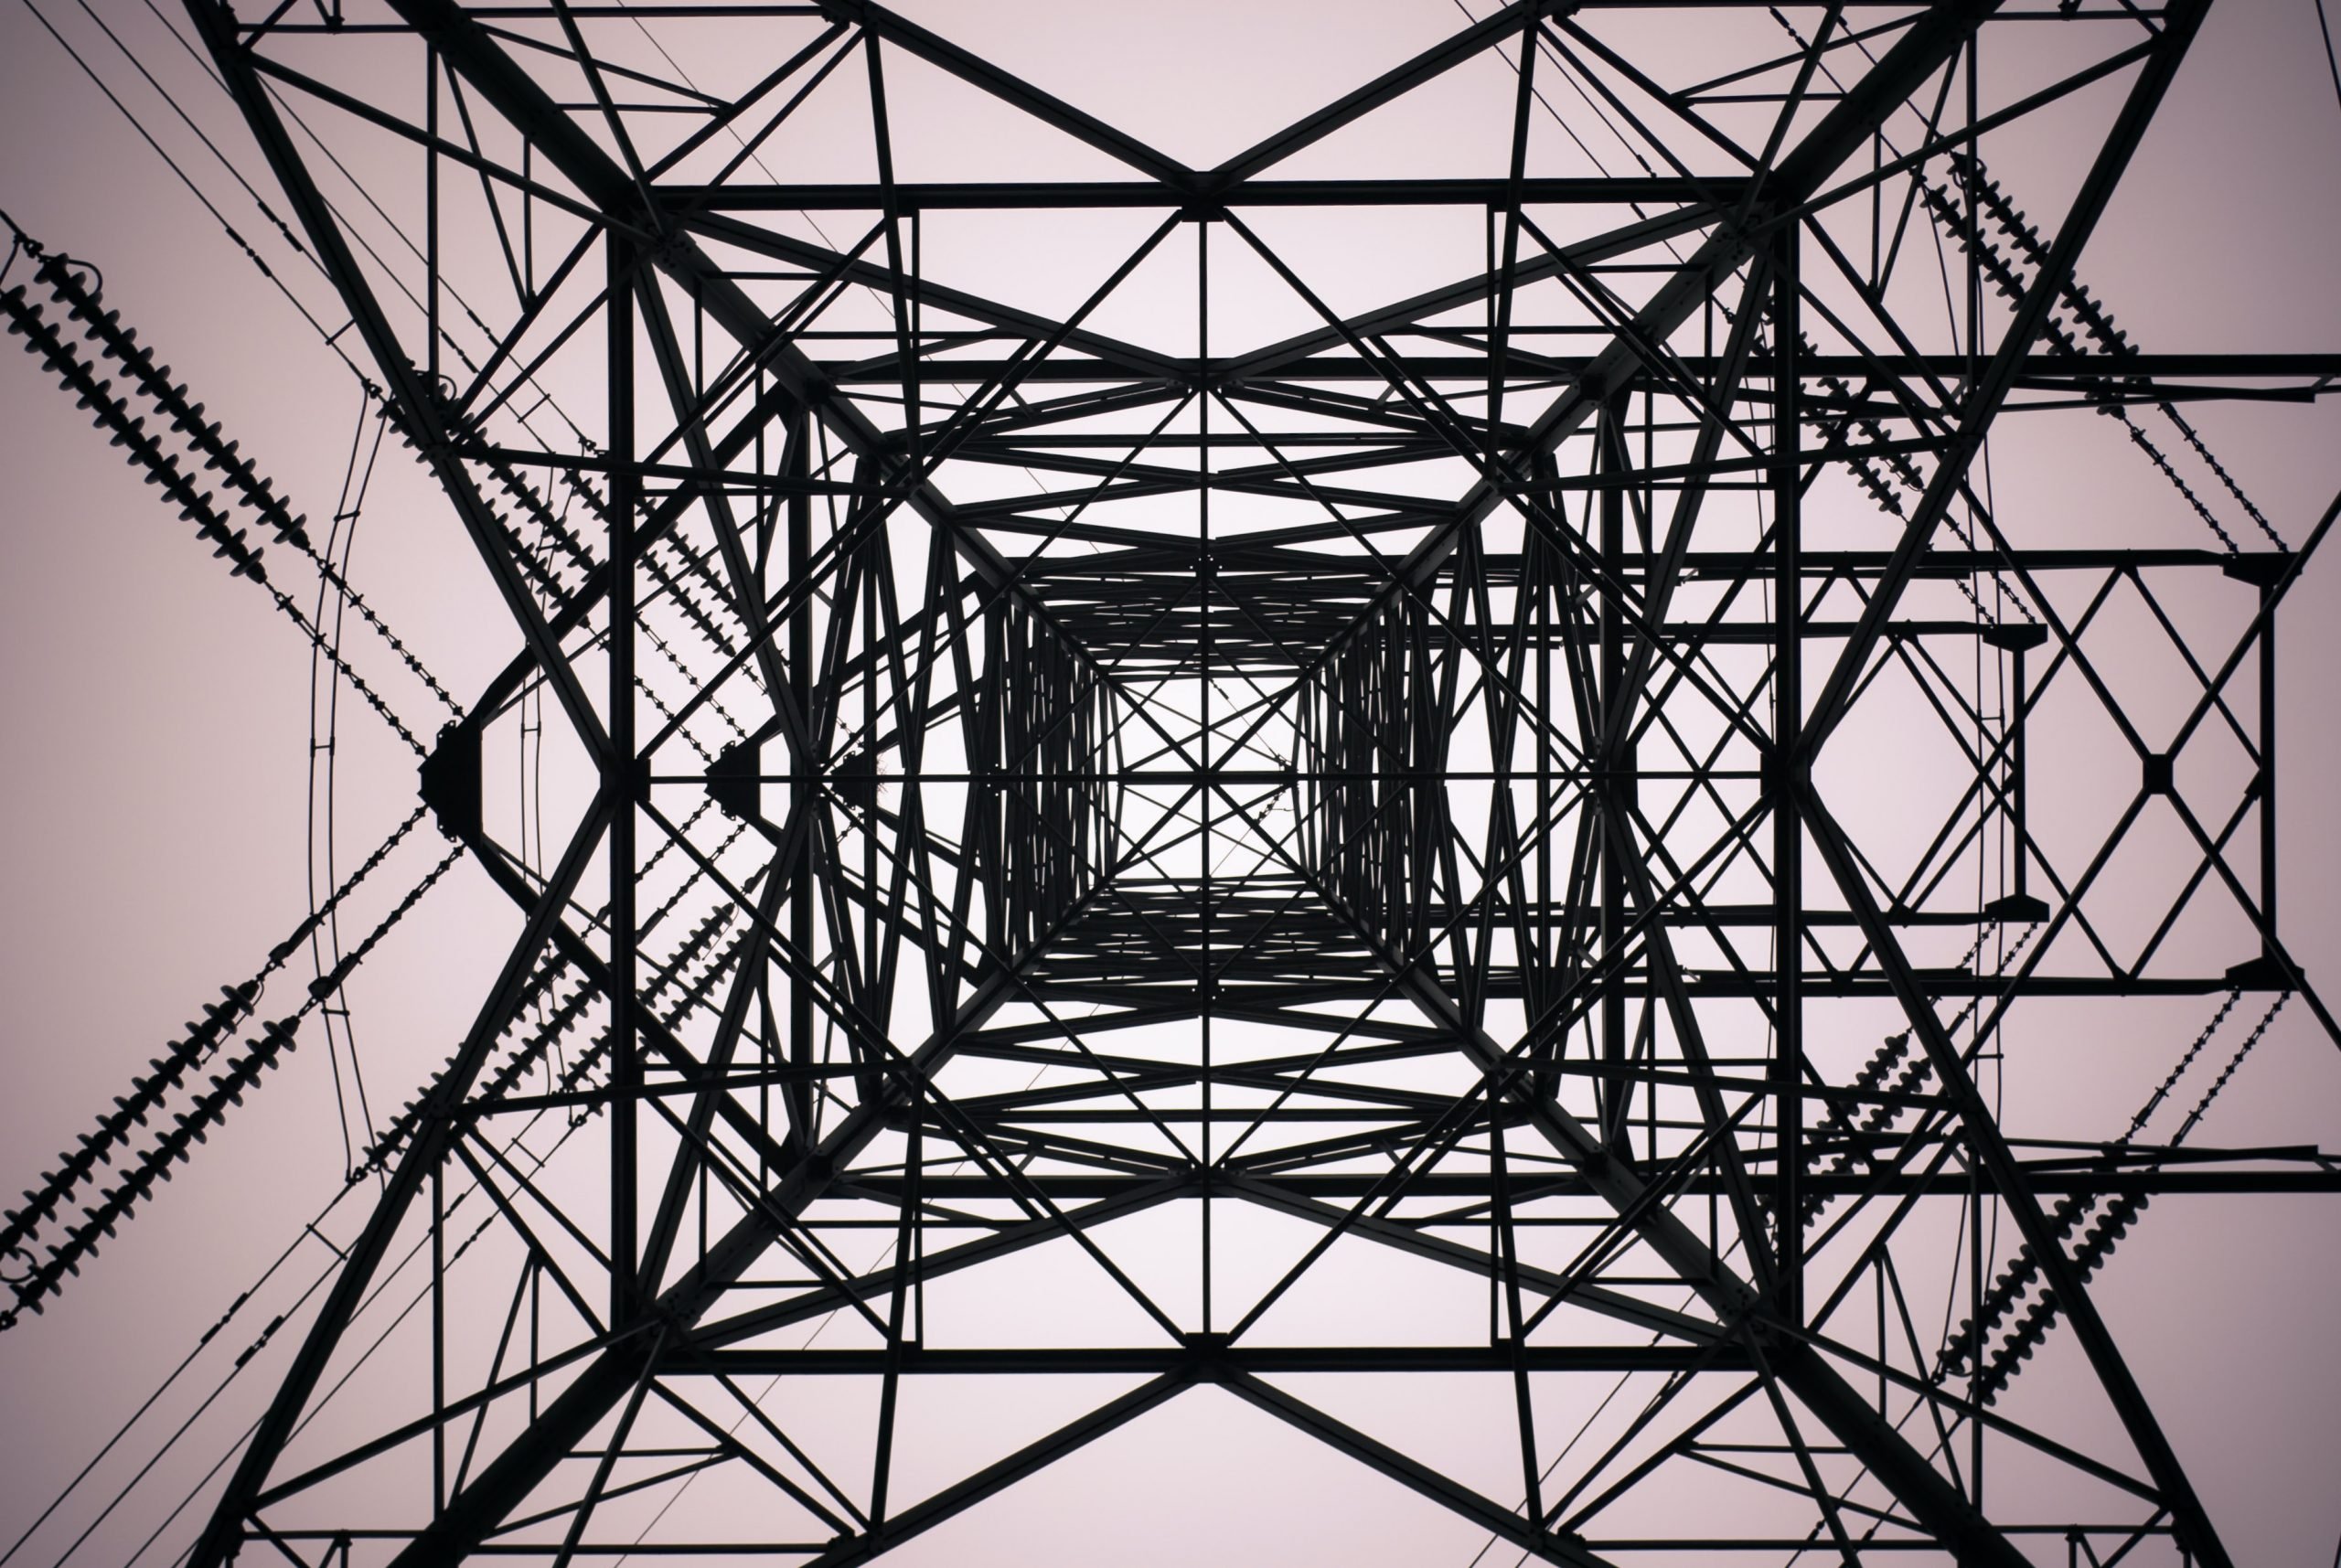 Ground to sky perspective of a black electrical tower